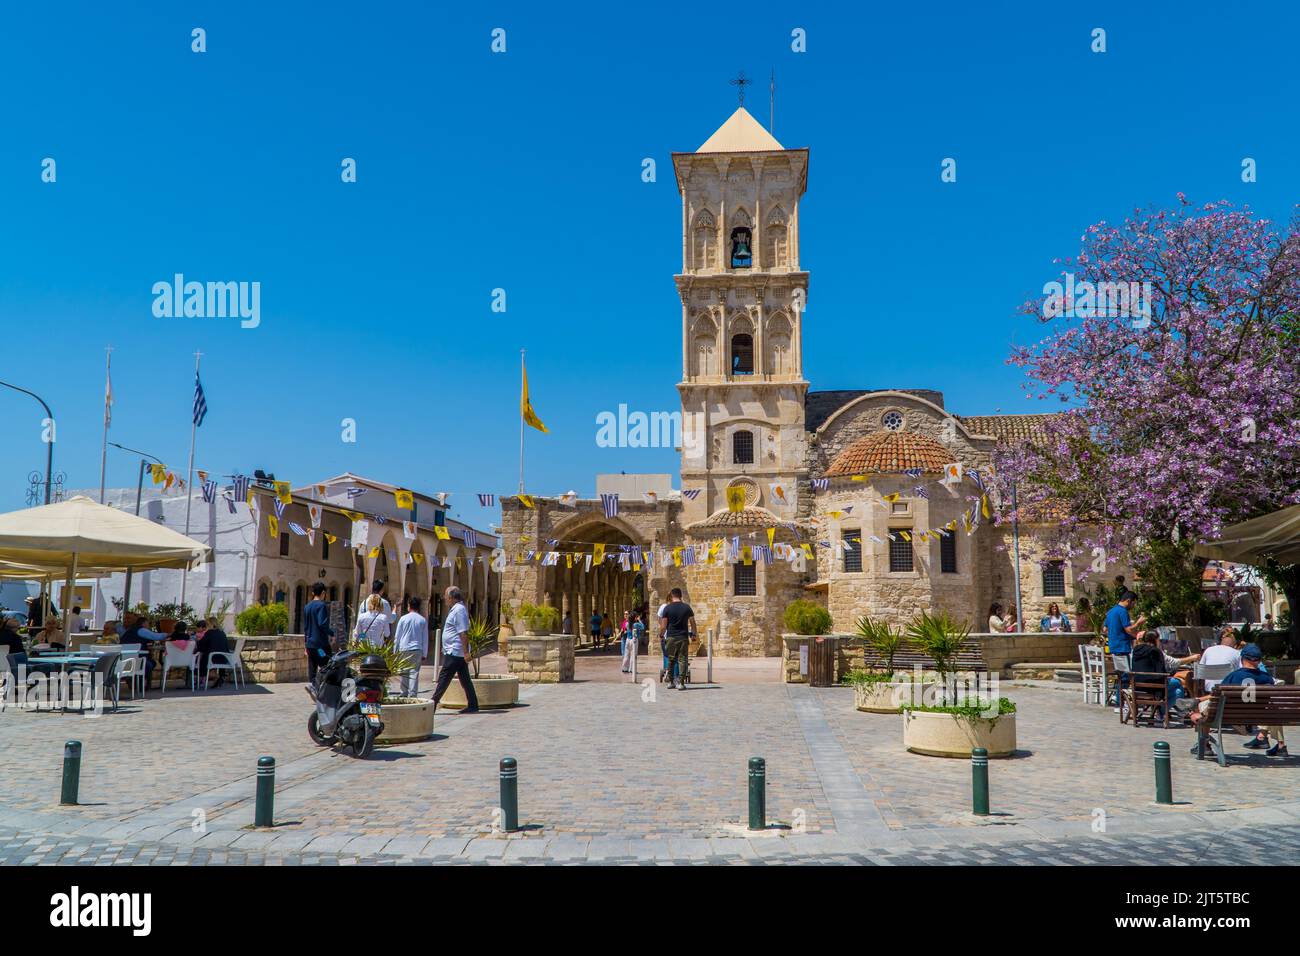 Larnaca, Cyprus - April 22, 2022 - candid street photography of people at St. Lazarus Church in summer under blue sky Stock Photo